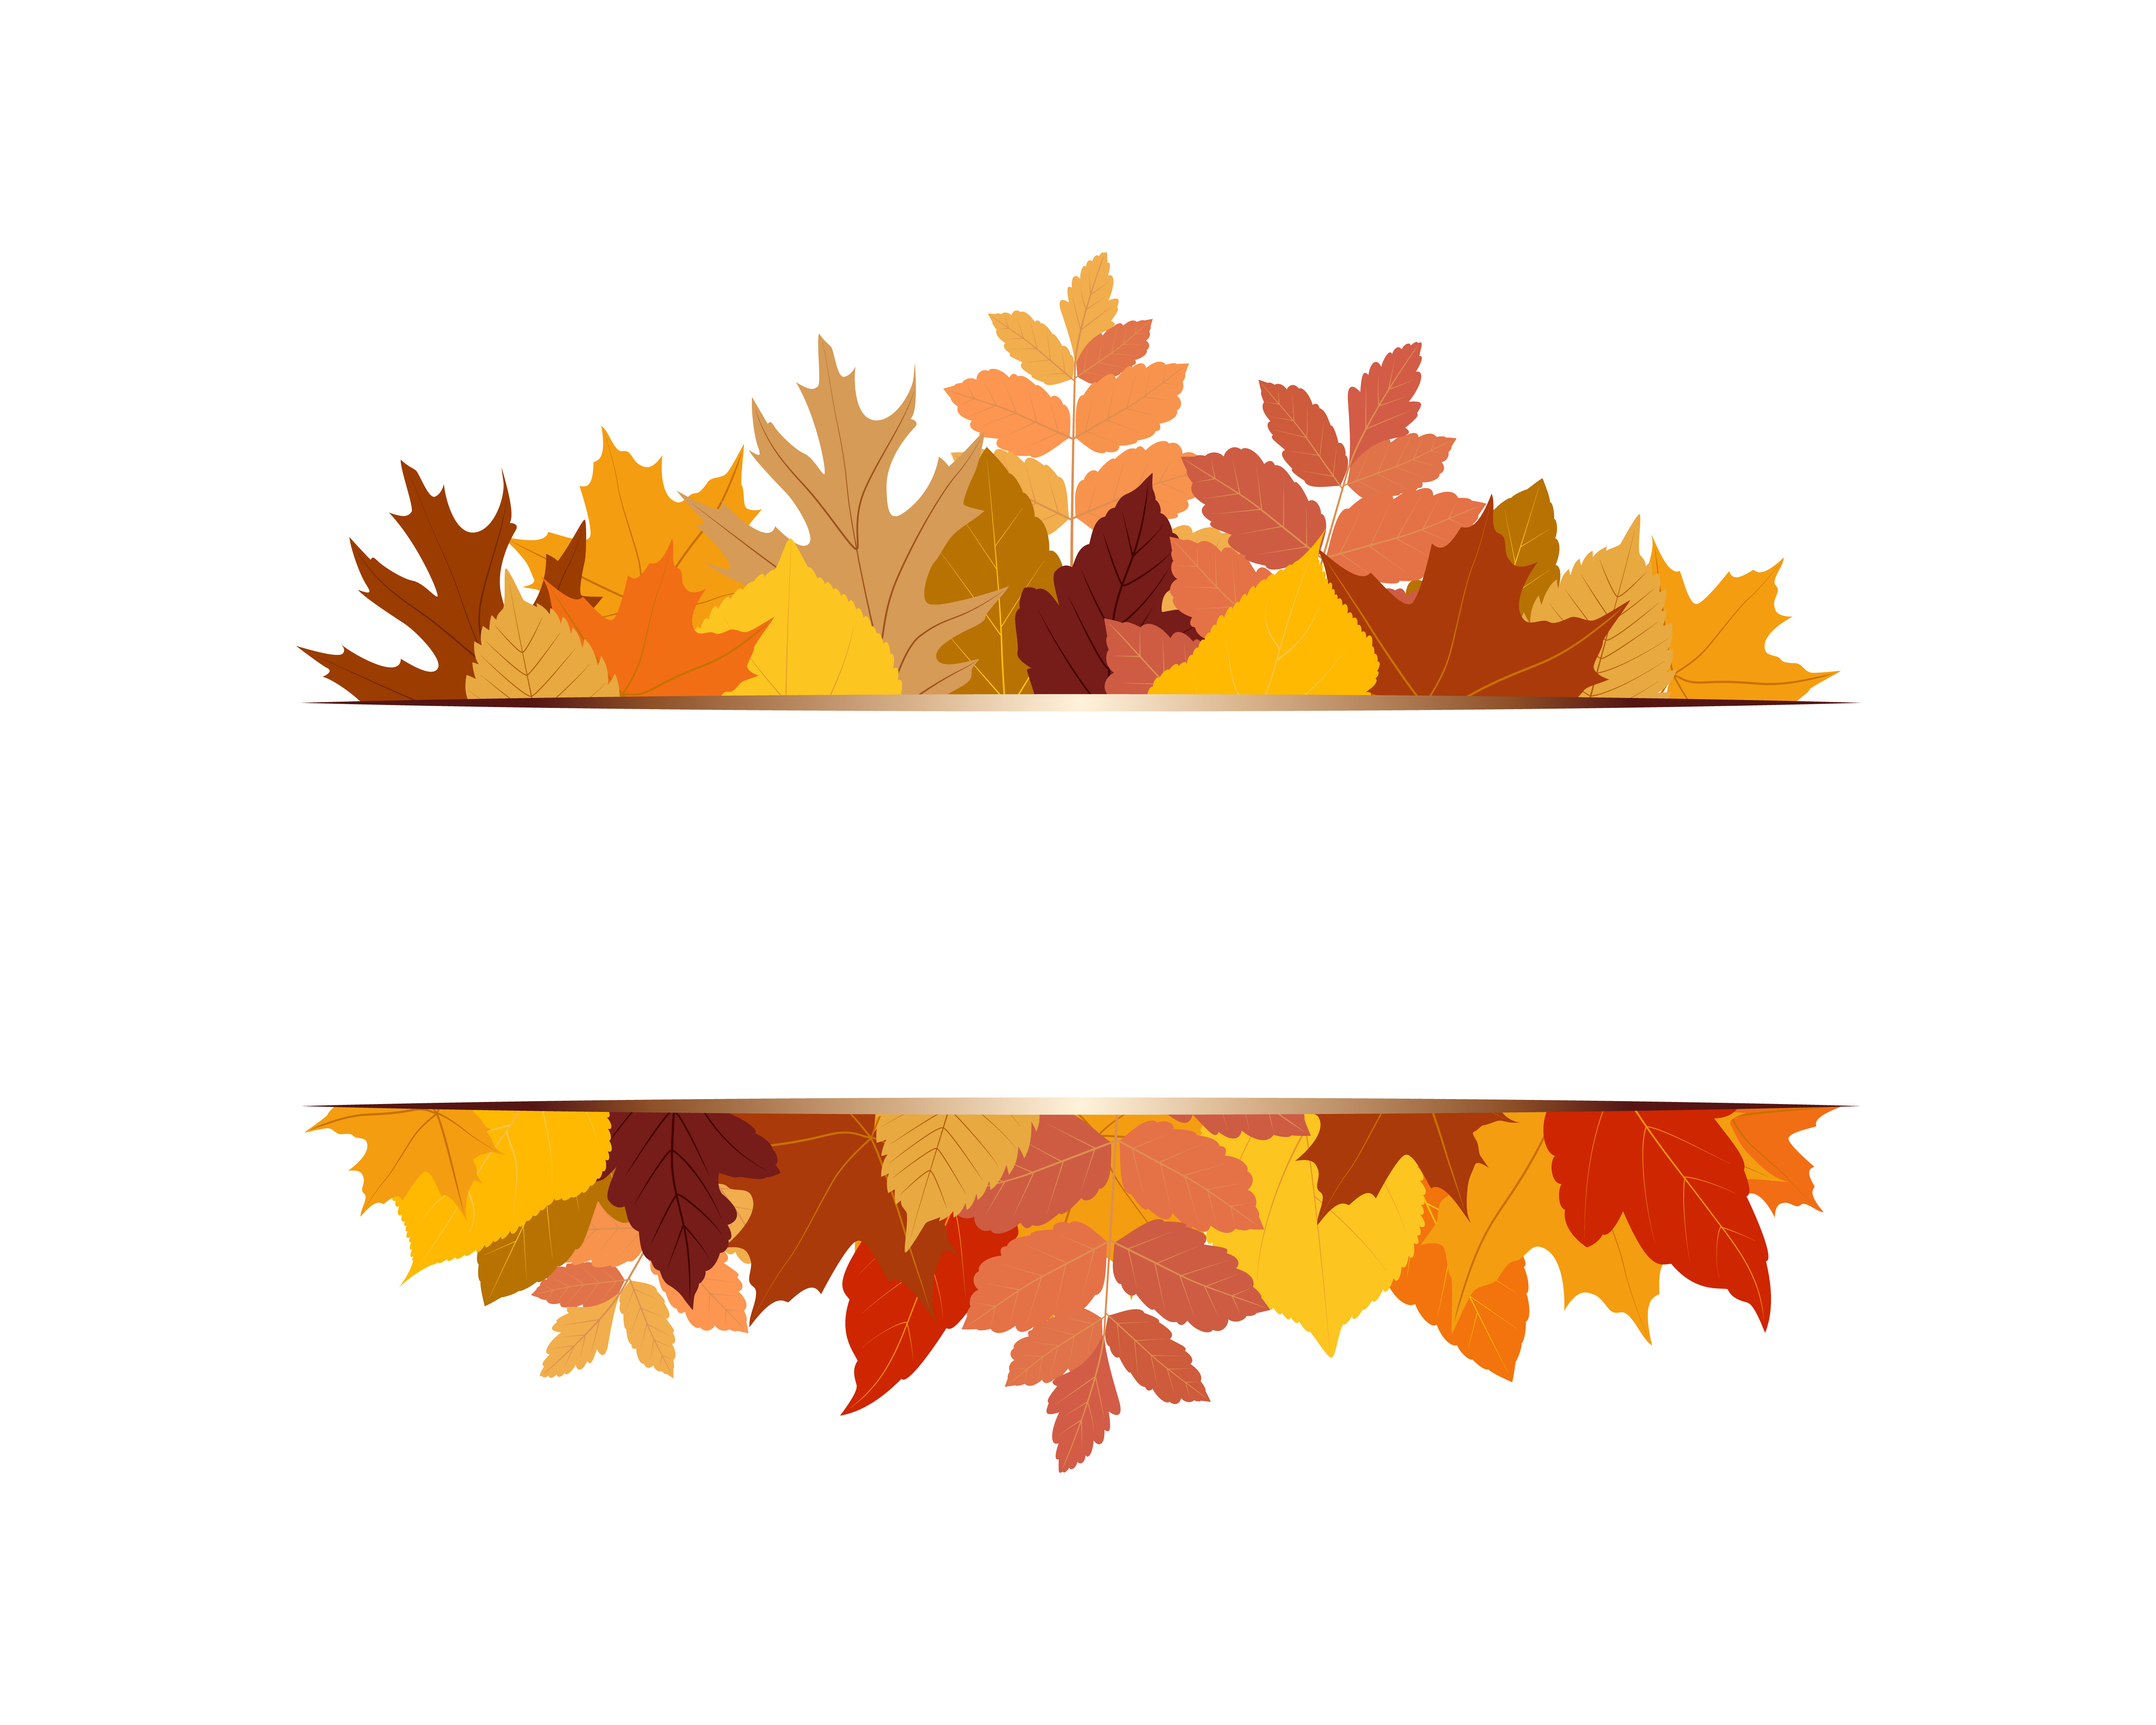 Vector illustration of various colorful autumn leaves with